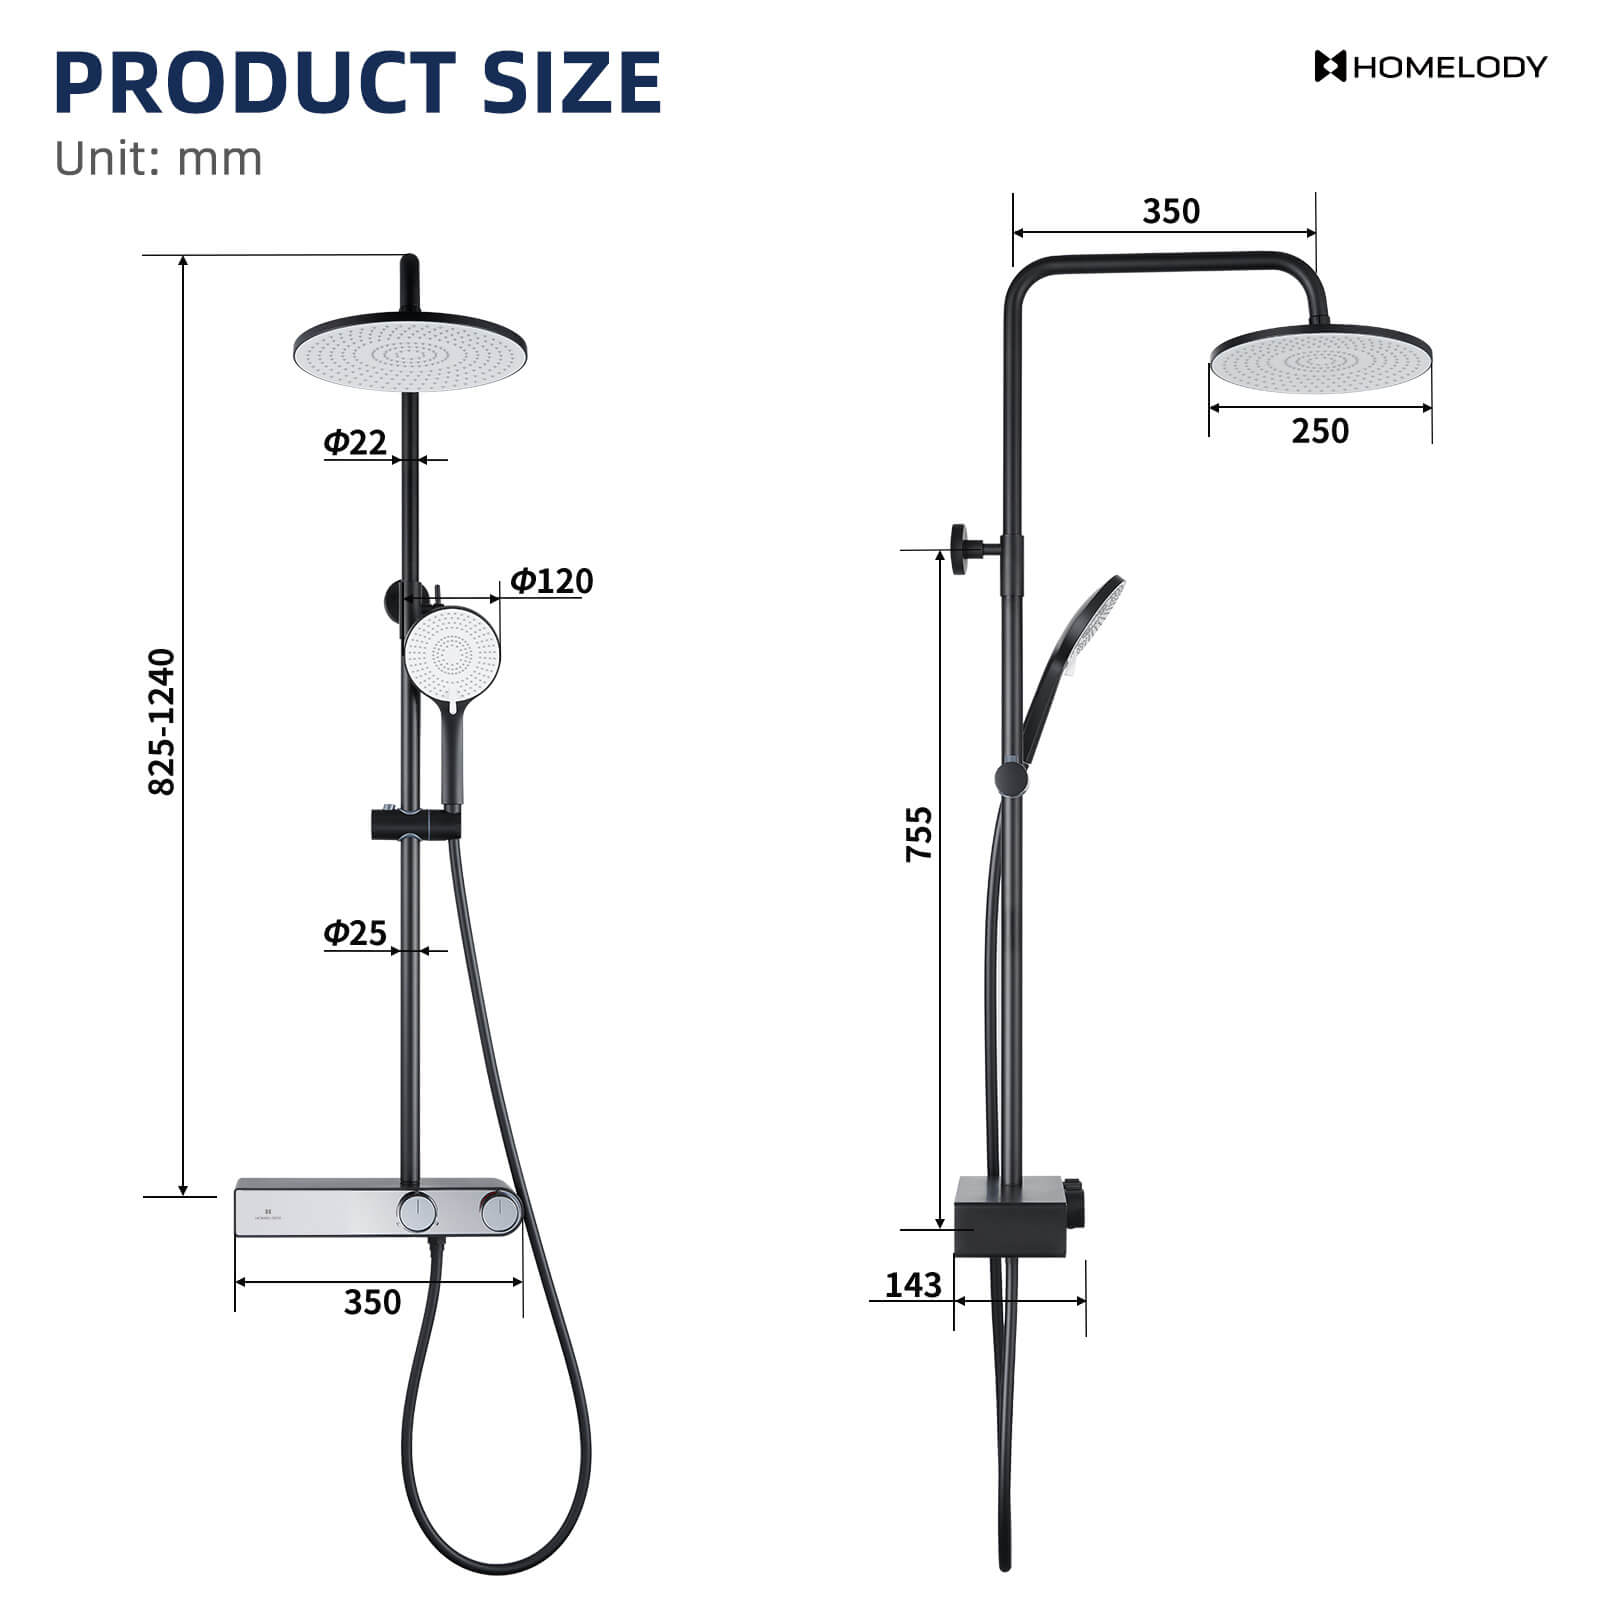 Homelody black shower system with LED temperature display. Adjustable